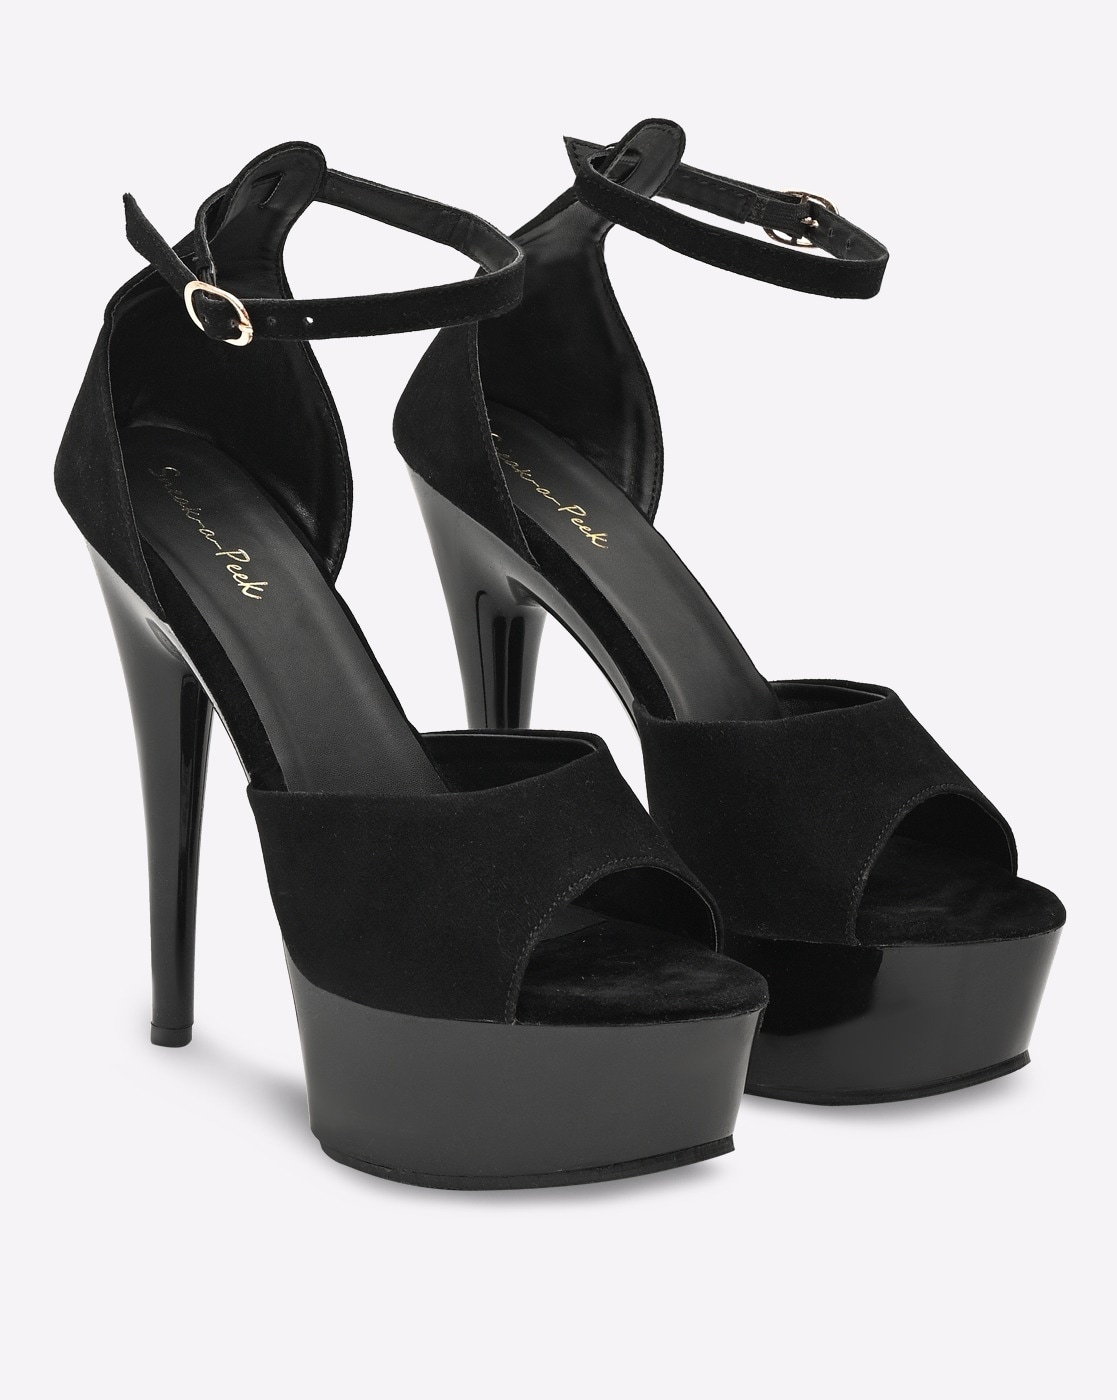 Lib Fly High Platforms Stiletto Super 12 inches Heels O Ring Decorated Pumps  - Red in Sexy Heels & Platforms - $149.59